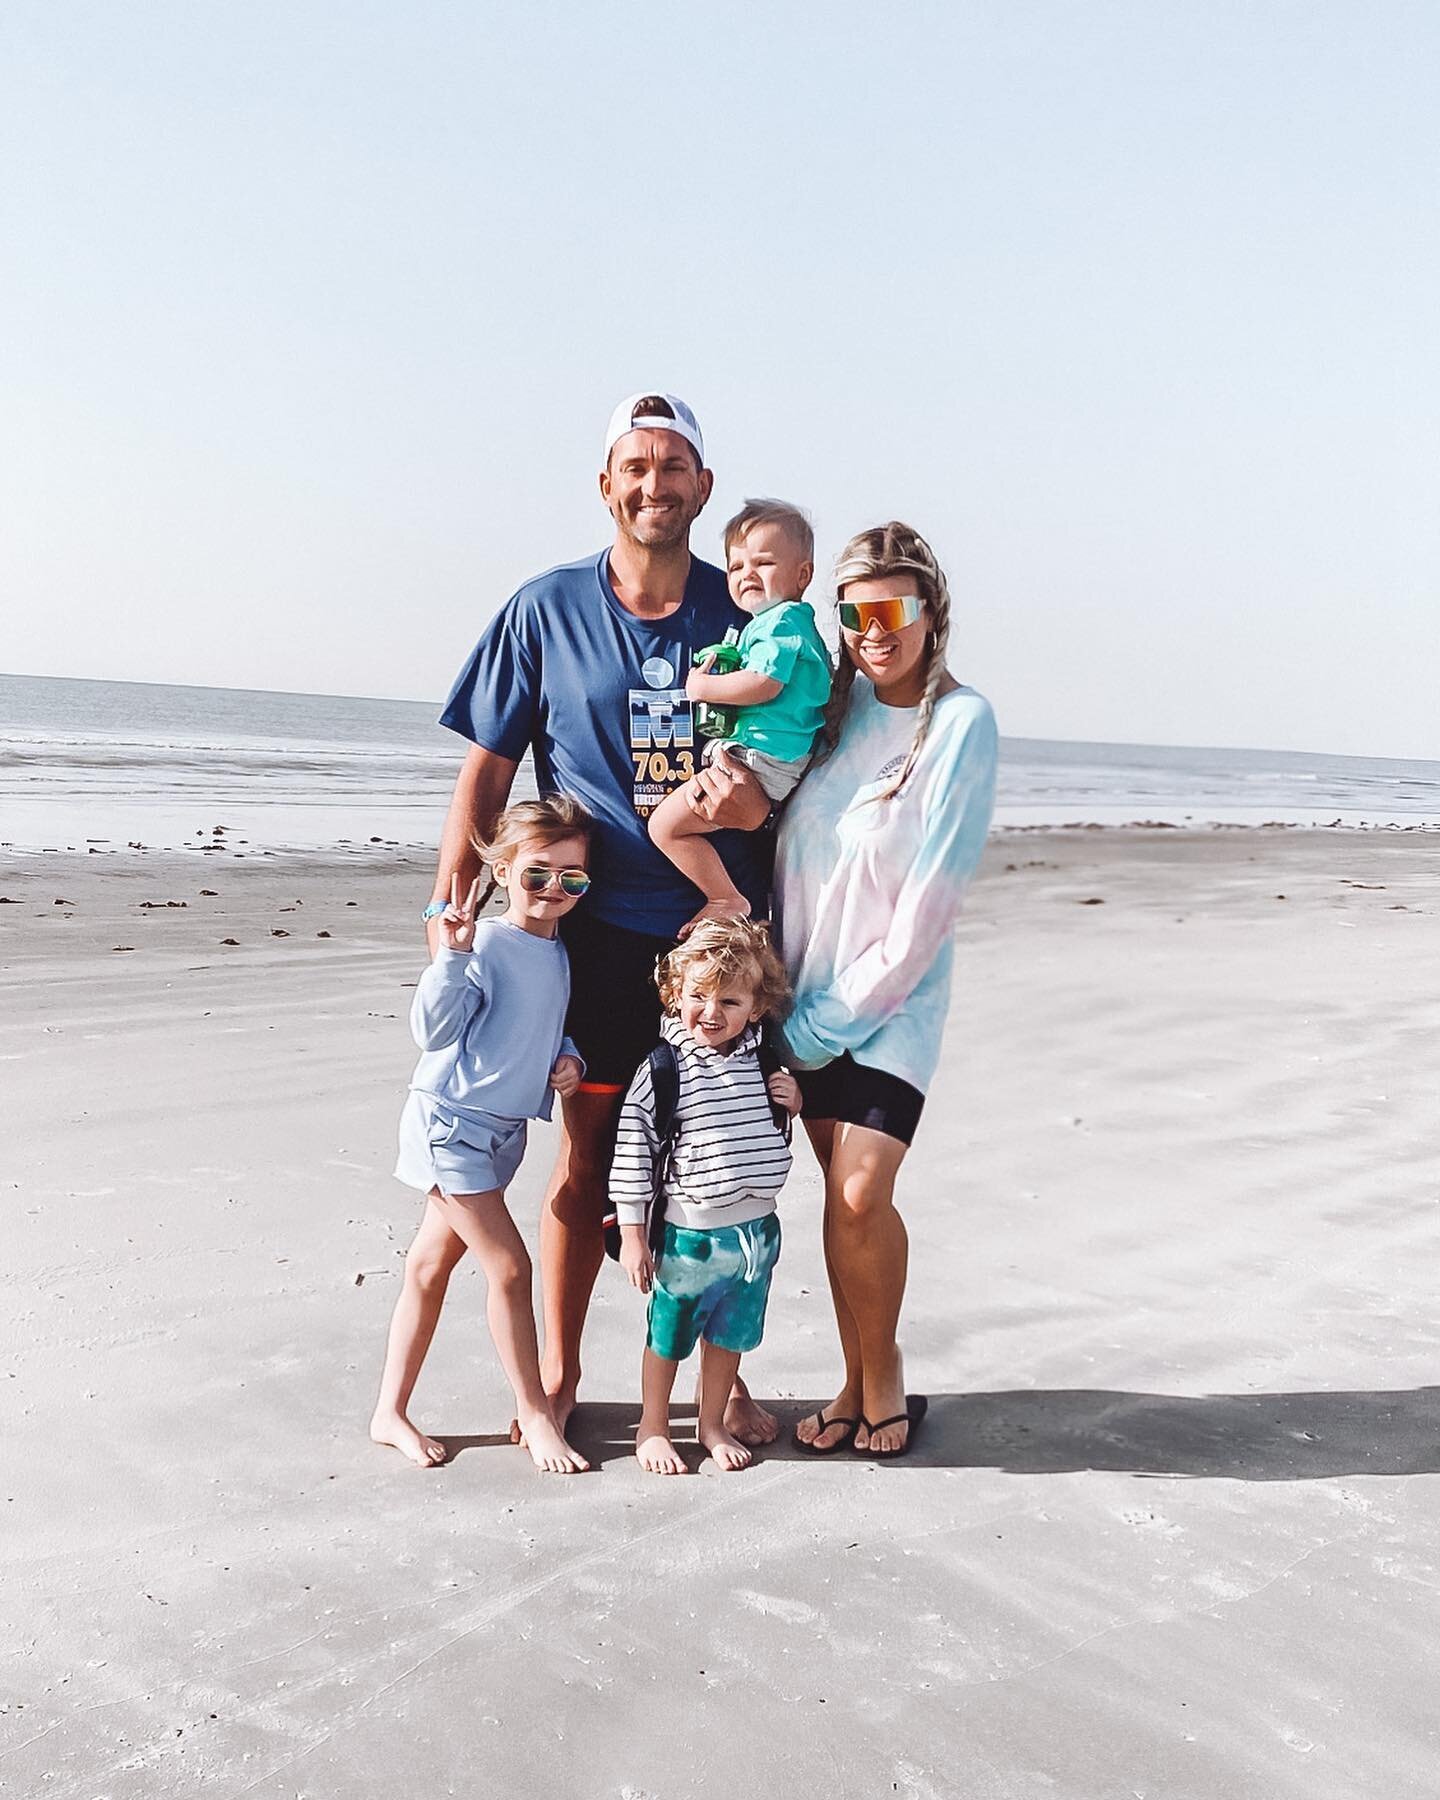 It was a week! 

We took our first long trip with the three kids to Galveston, TX for Beau&rsquo;s Ironman race and it was a wild ride! From JetBlue &lsquo;losing&rsquo; Beau&rsquo;s bike to cause him to almost miss the race, to a sign from a higher 